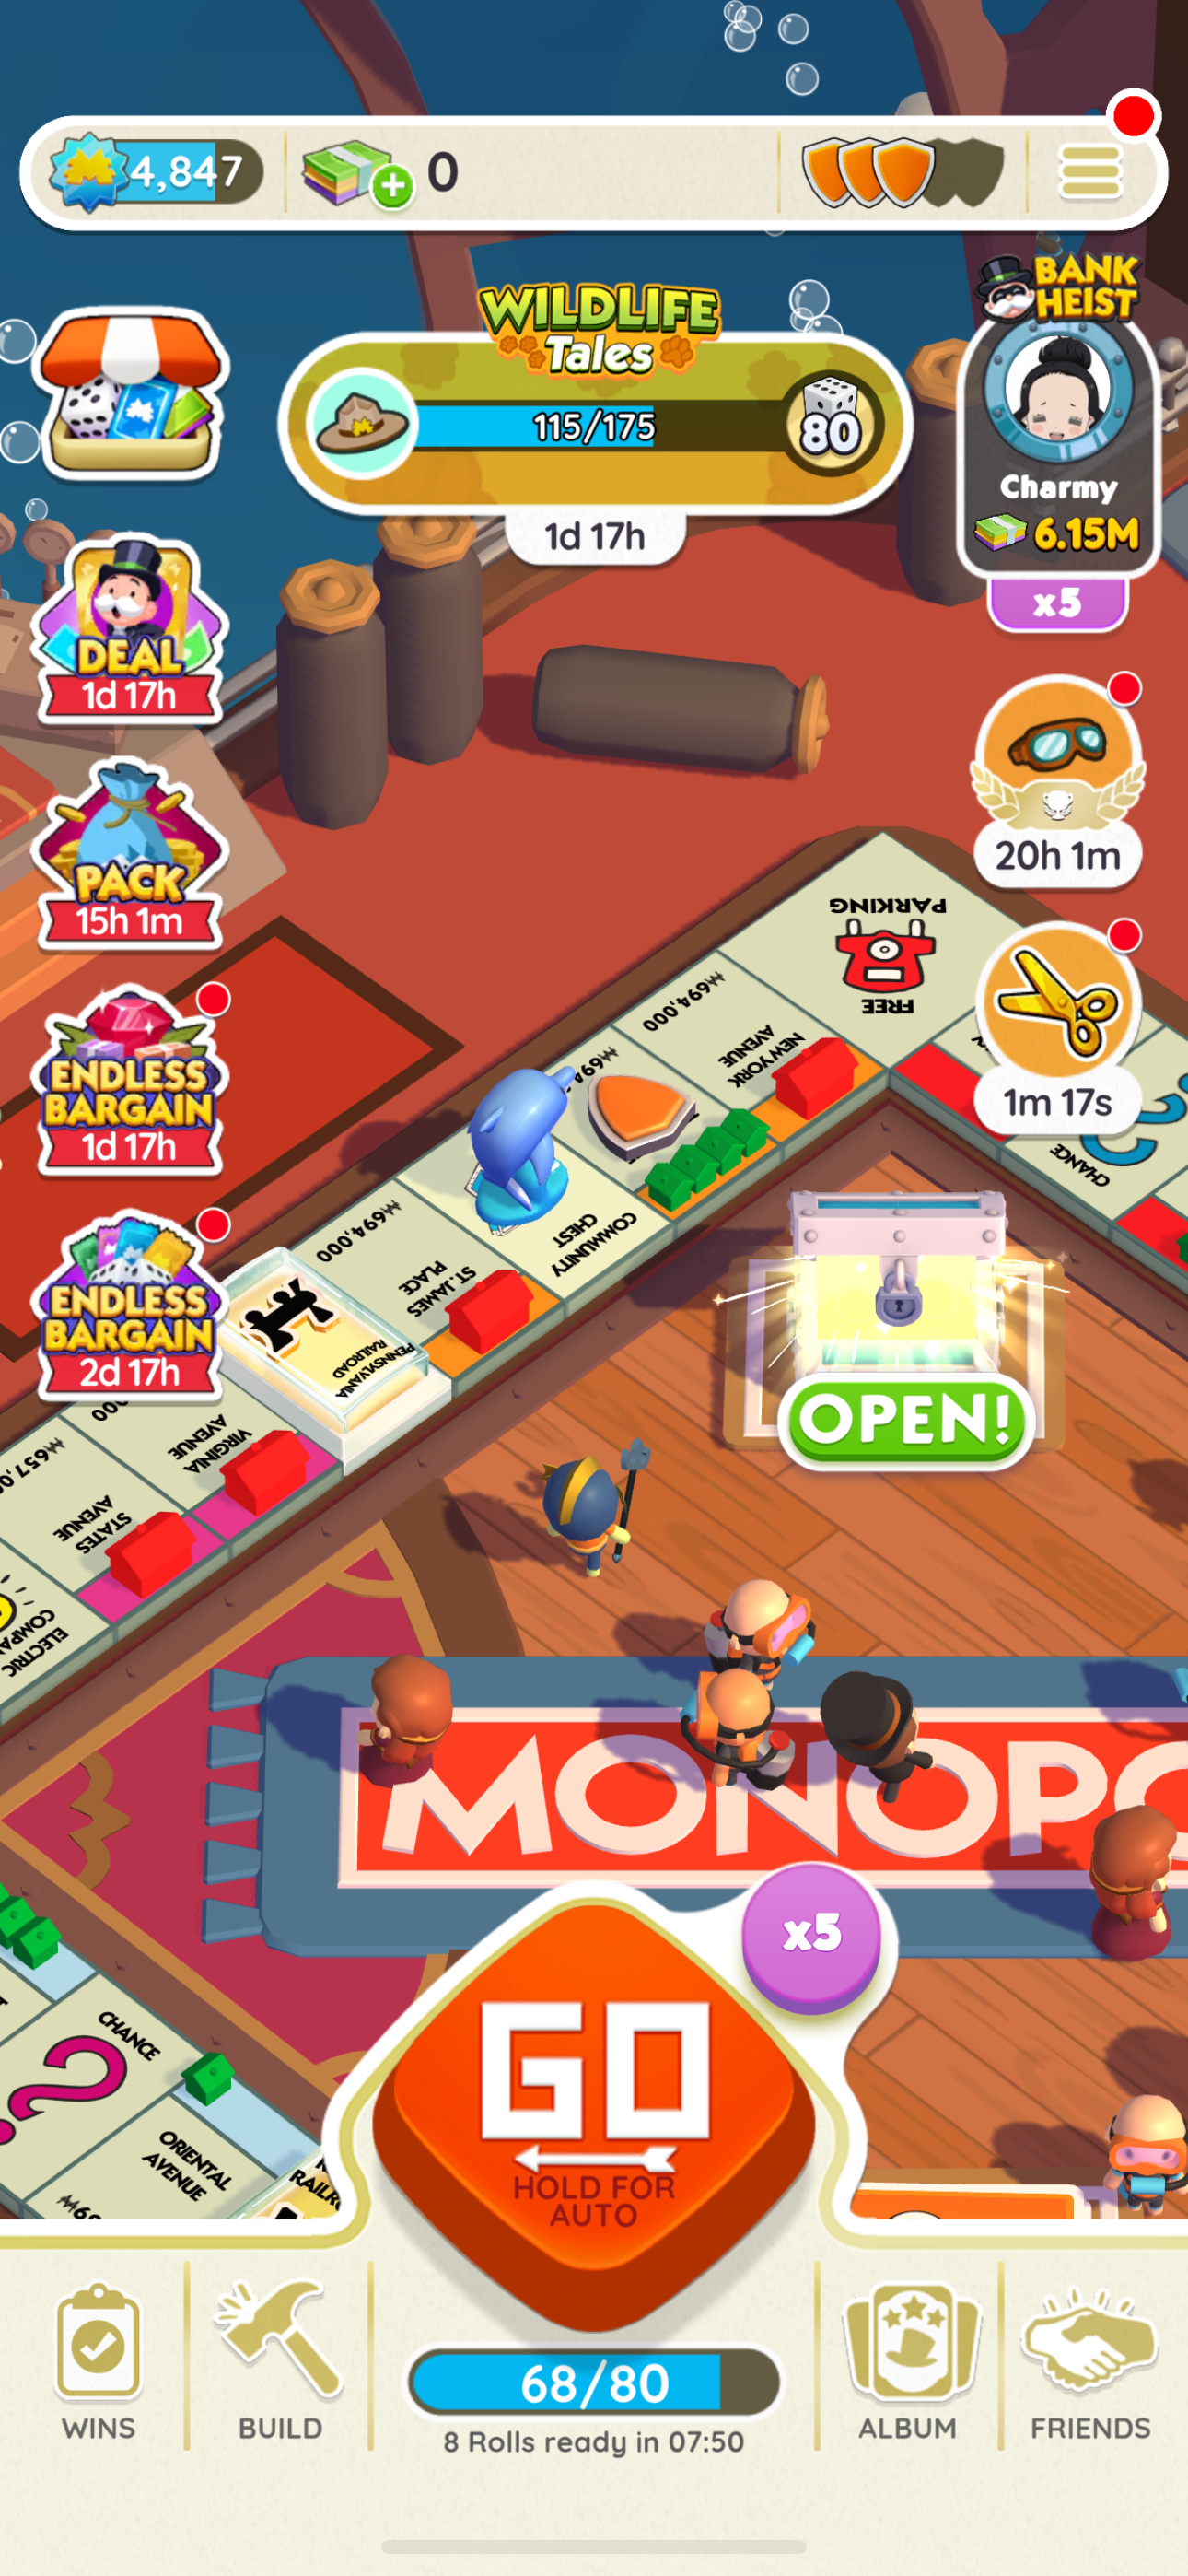 How to download and play Monopoly GO!